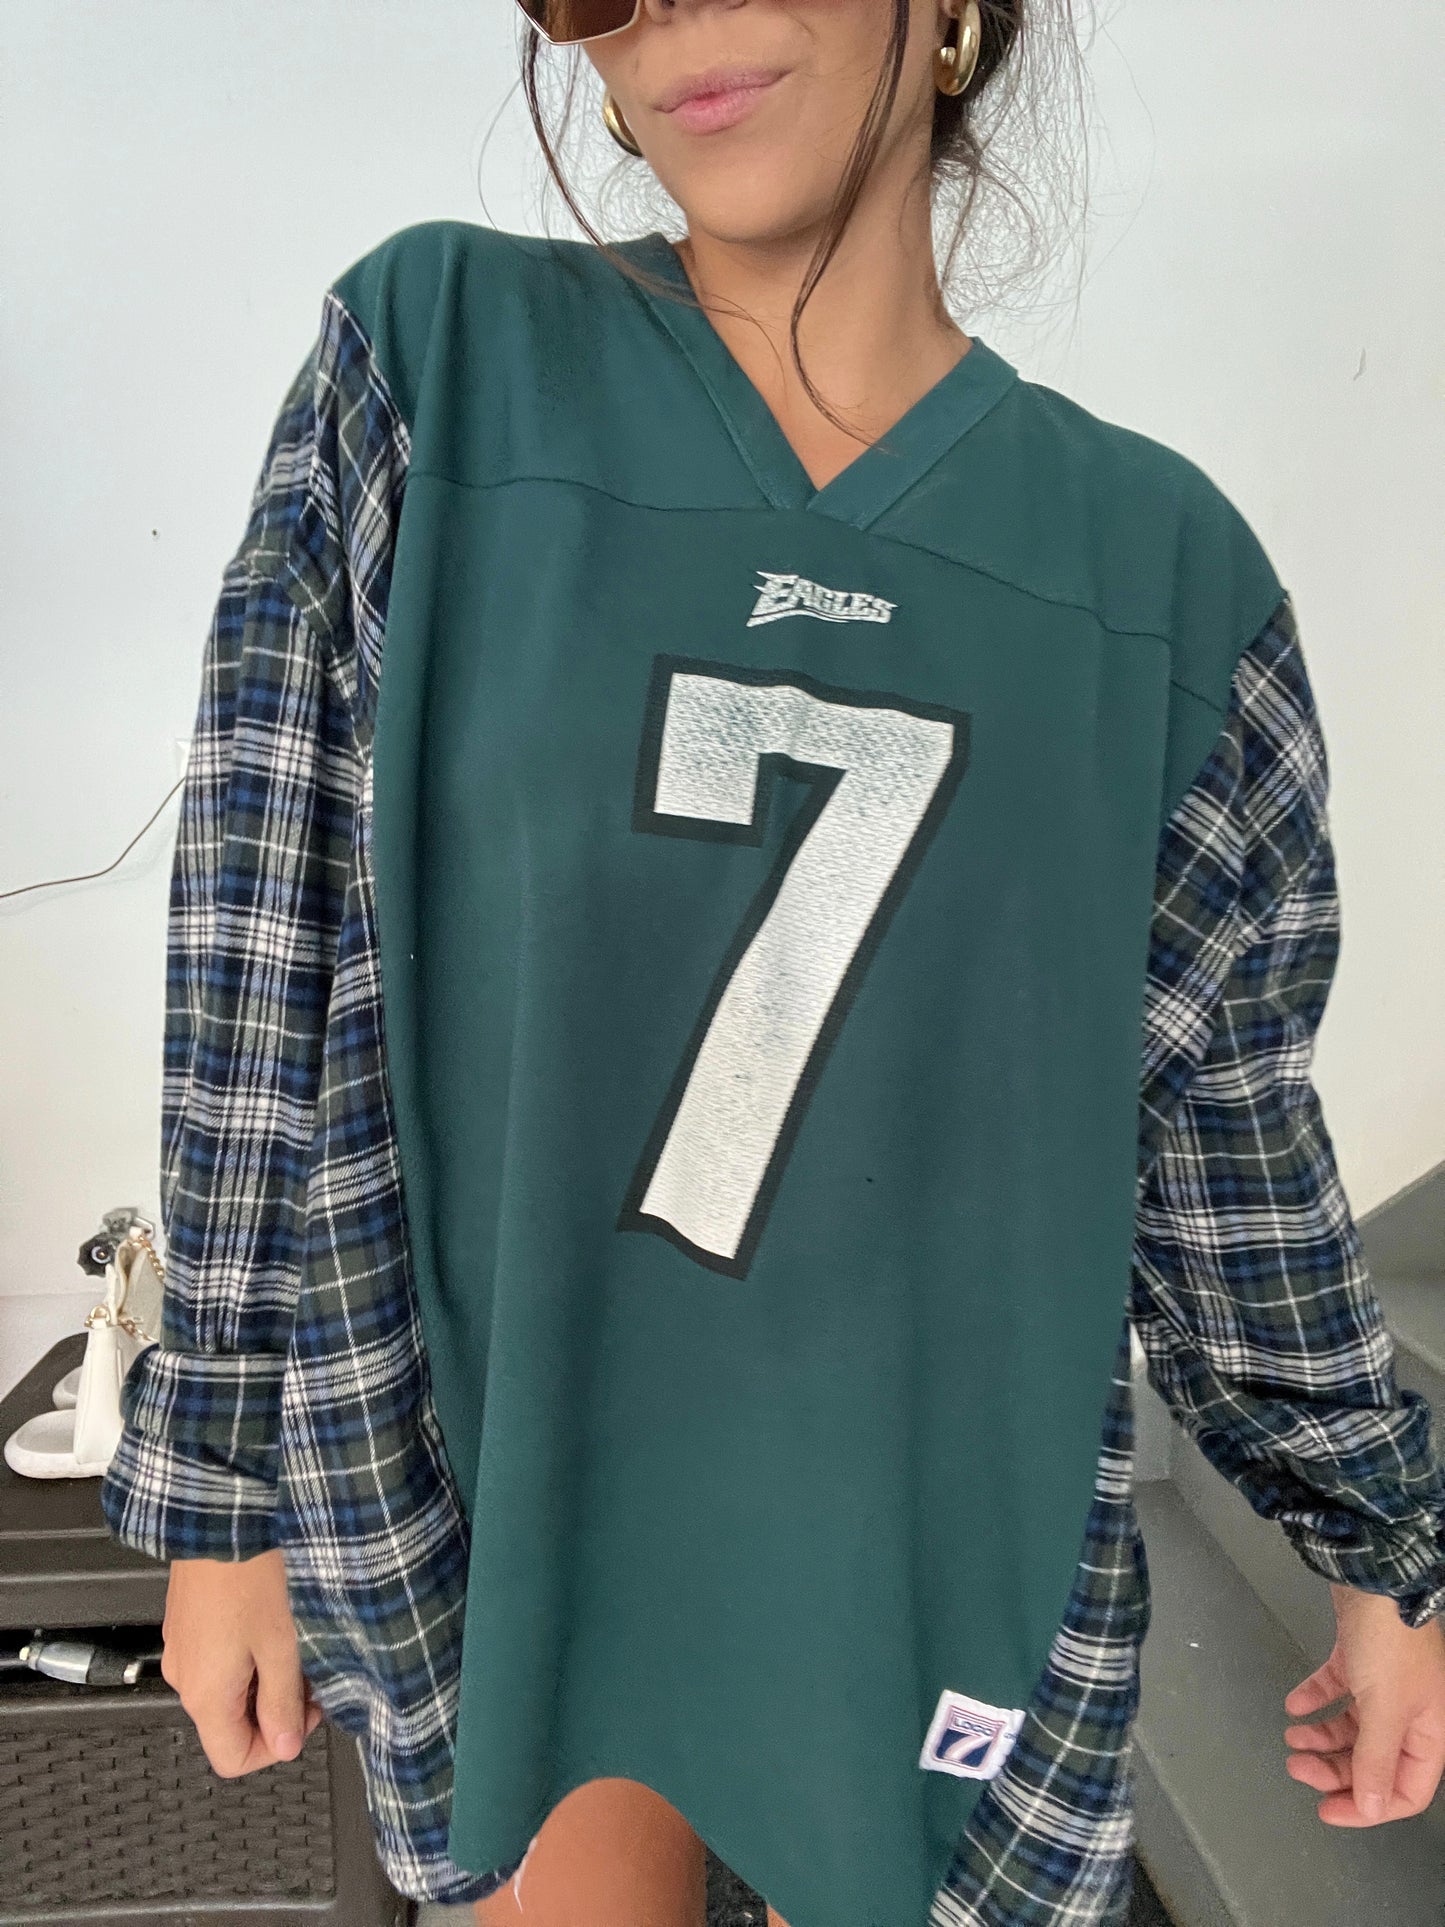 #18 HOYING EAGLES JERSEY X FLANNEL